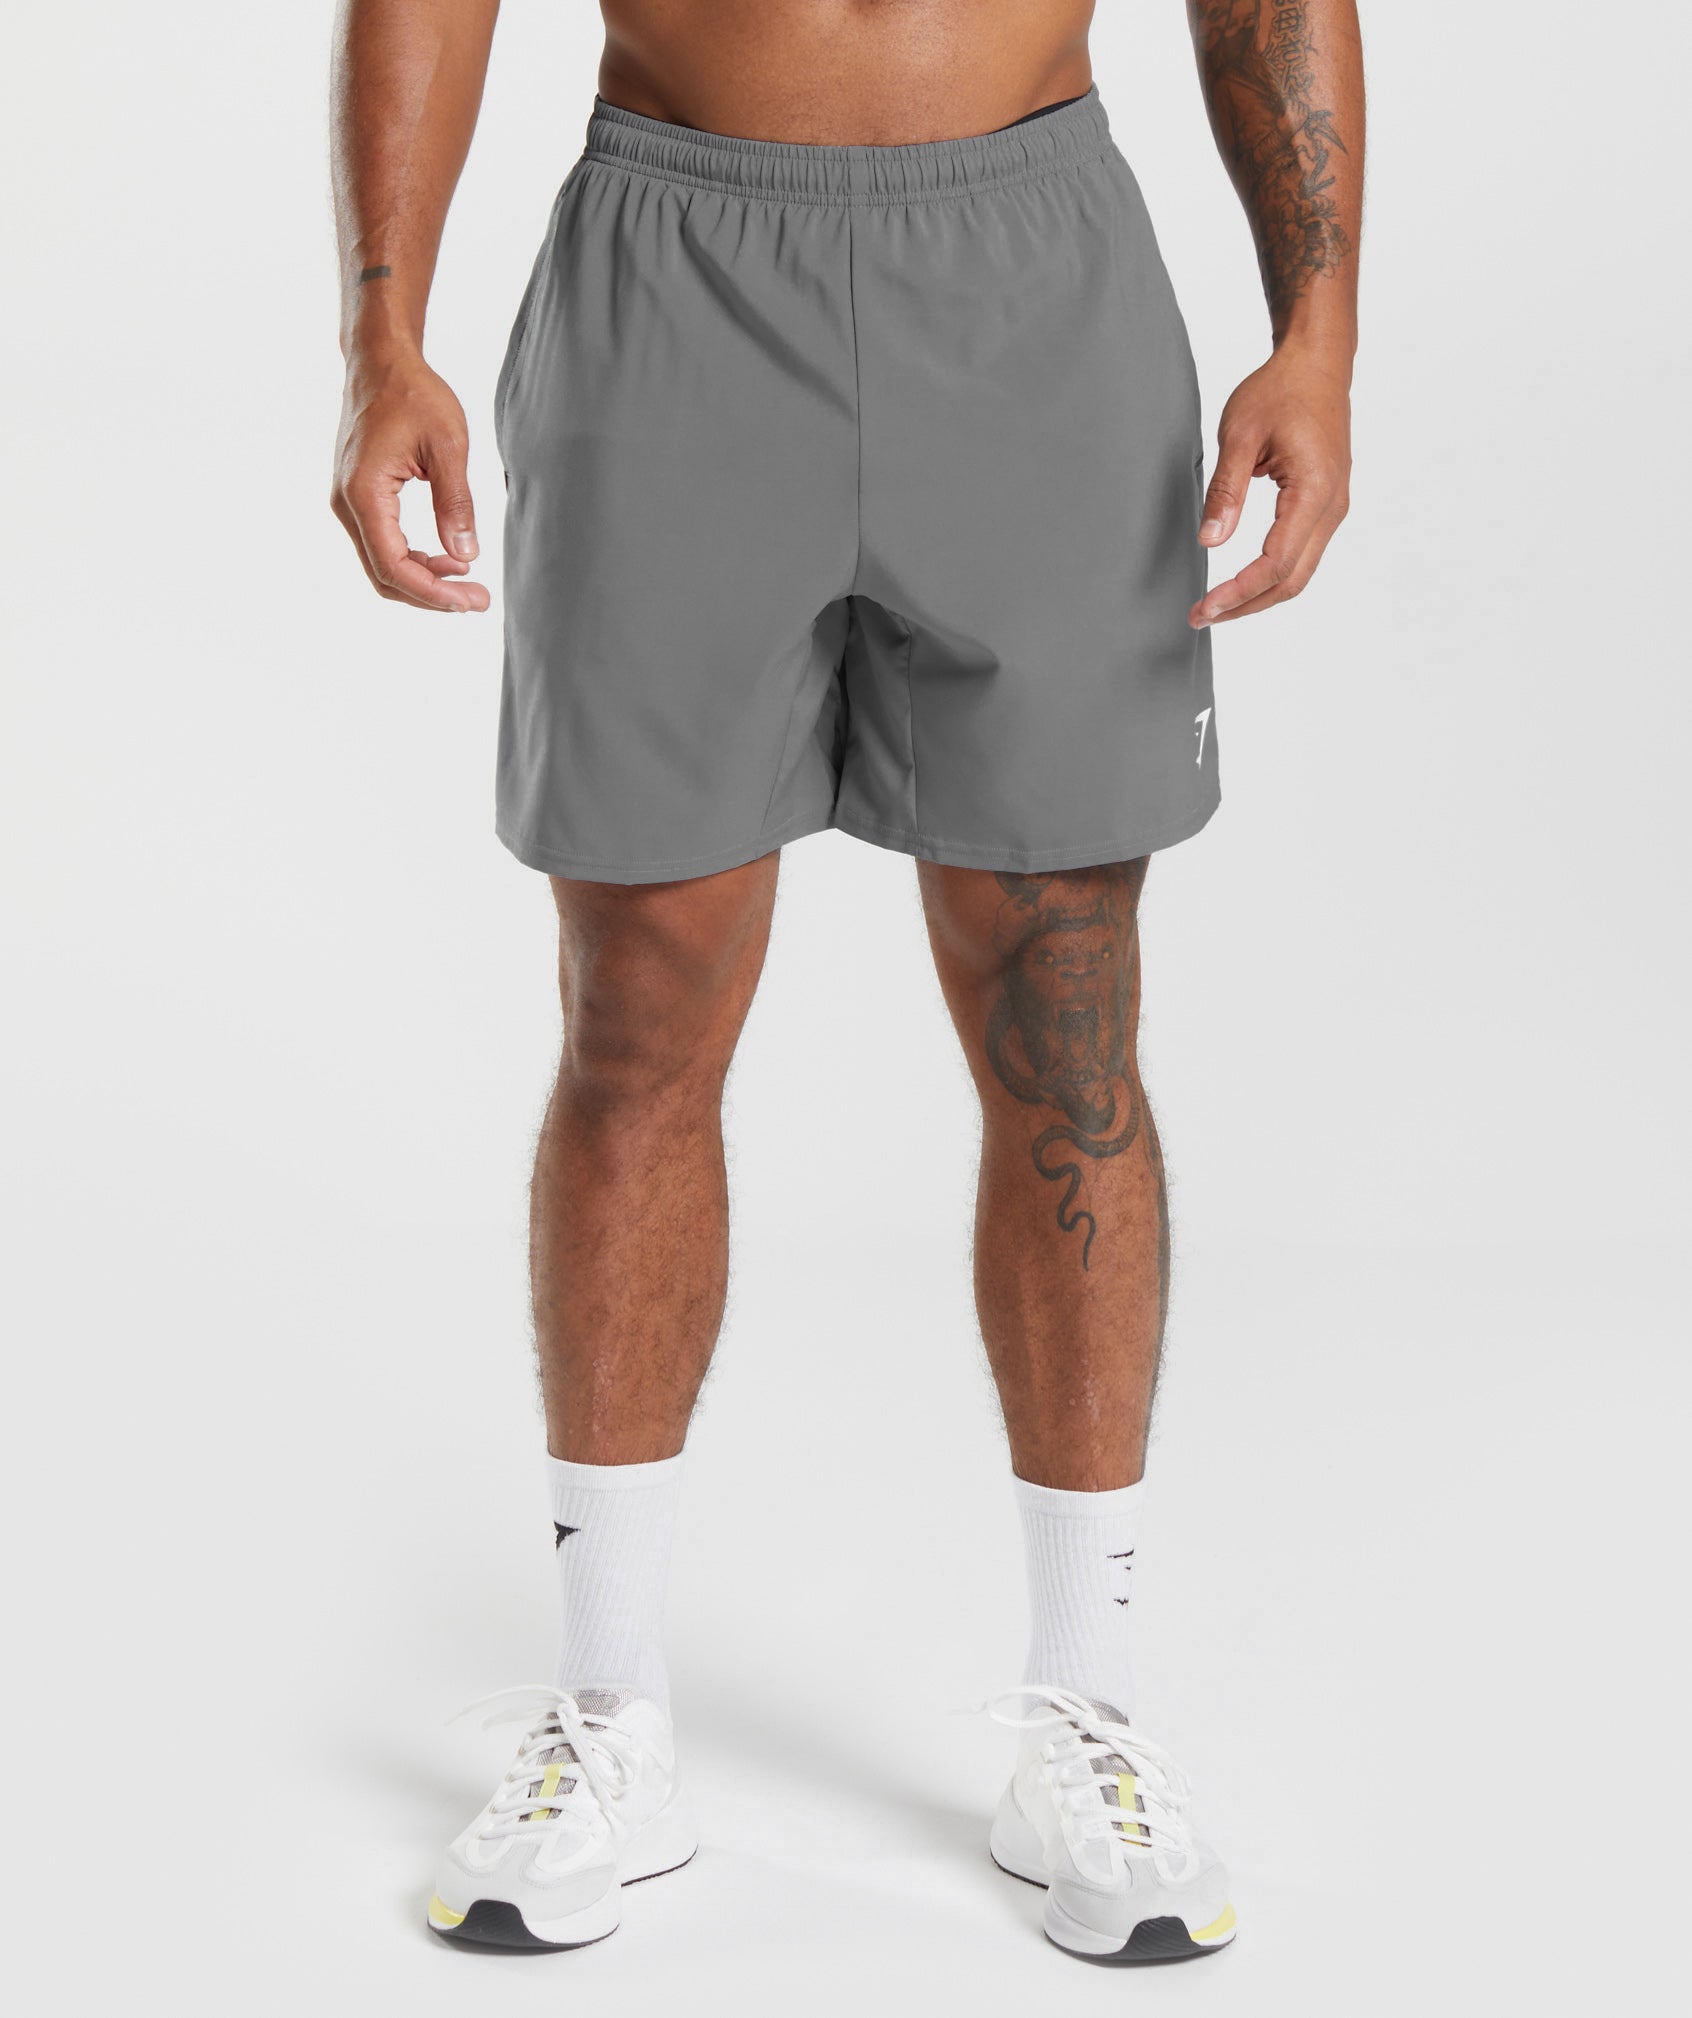 Arrival Shorts in Charcoal Grey - view 1